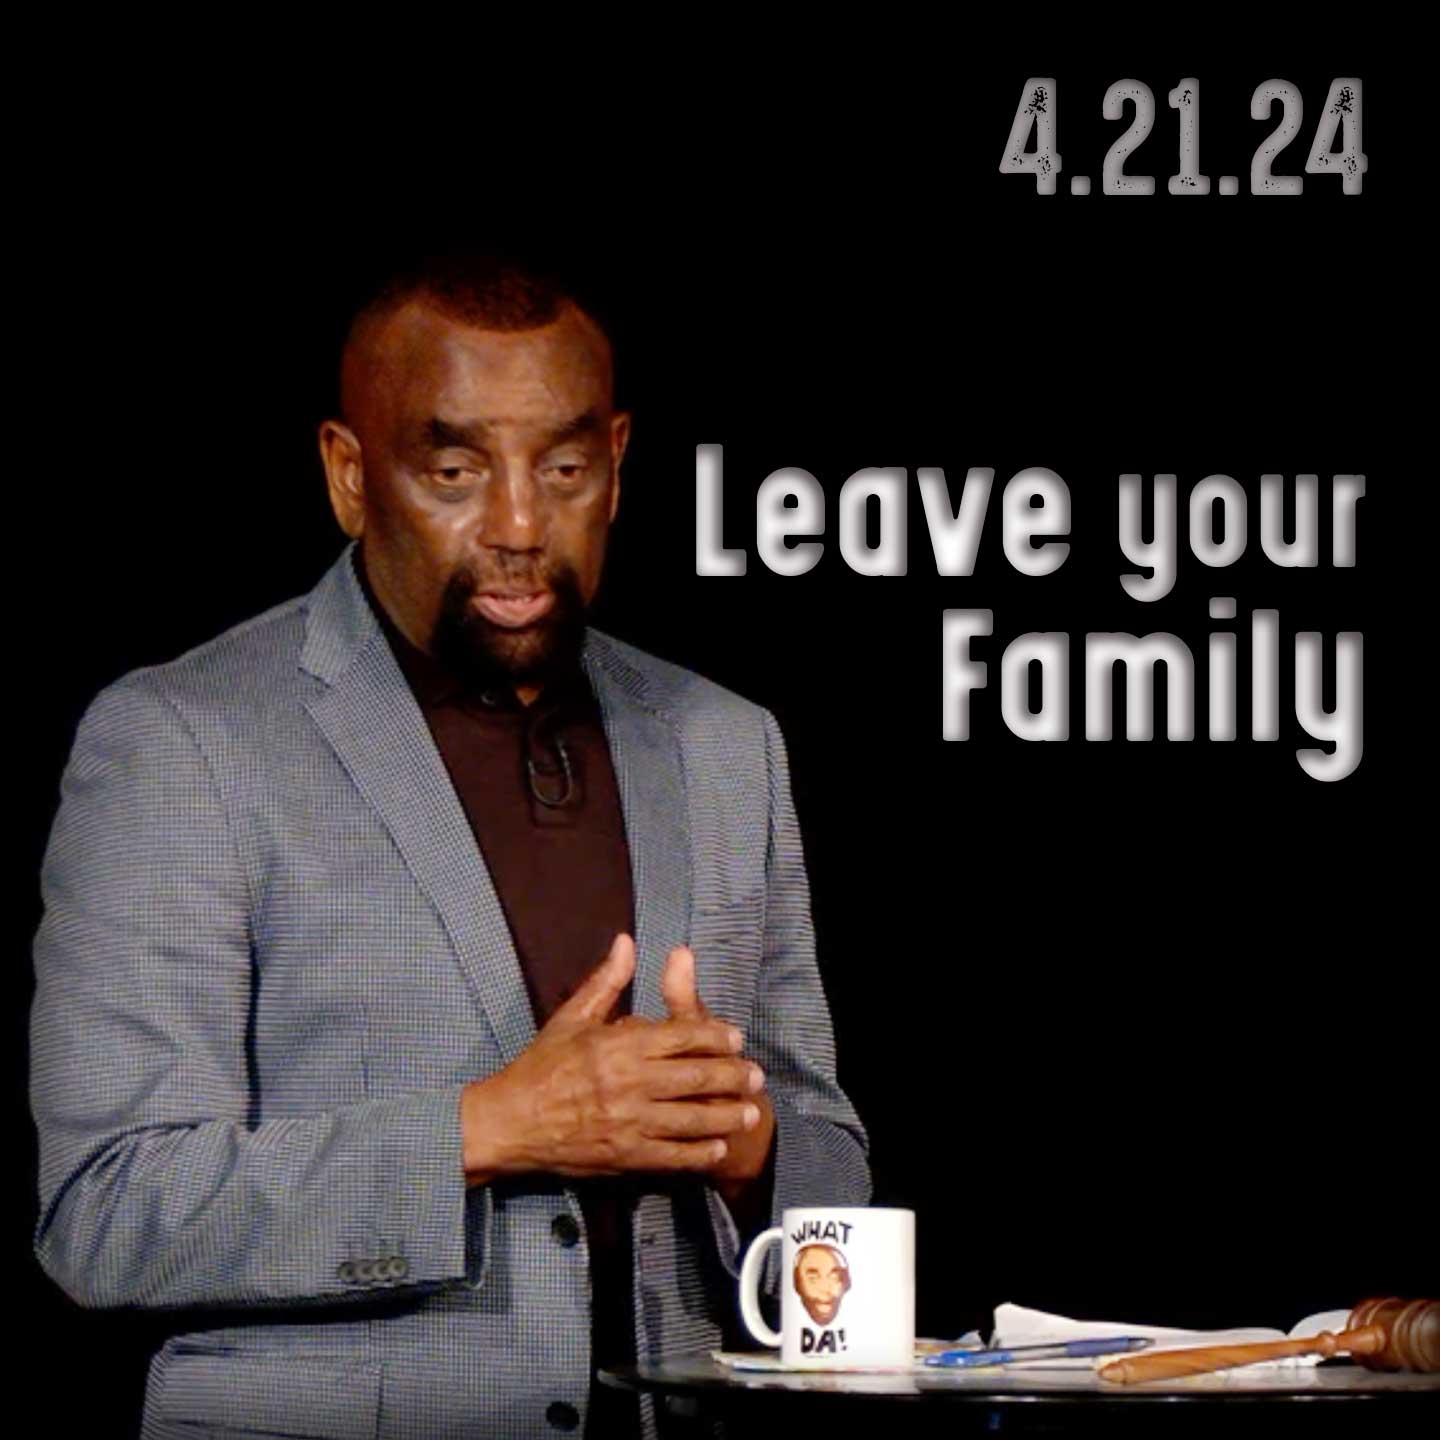 Is your family important to you? | Church 4/21/24